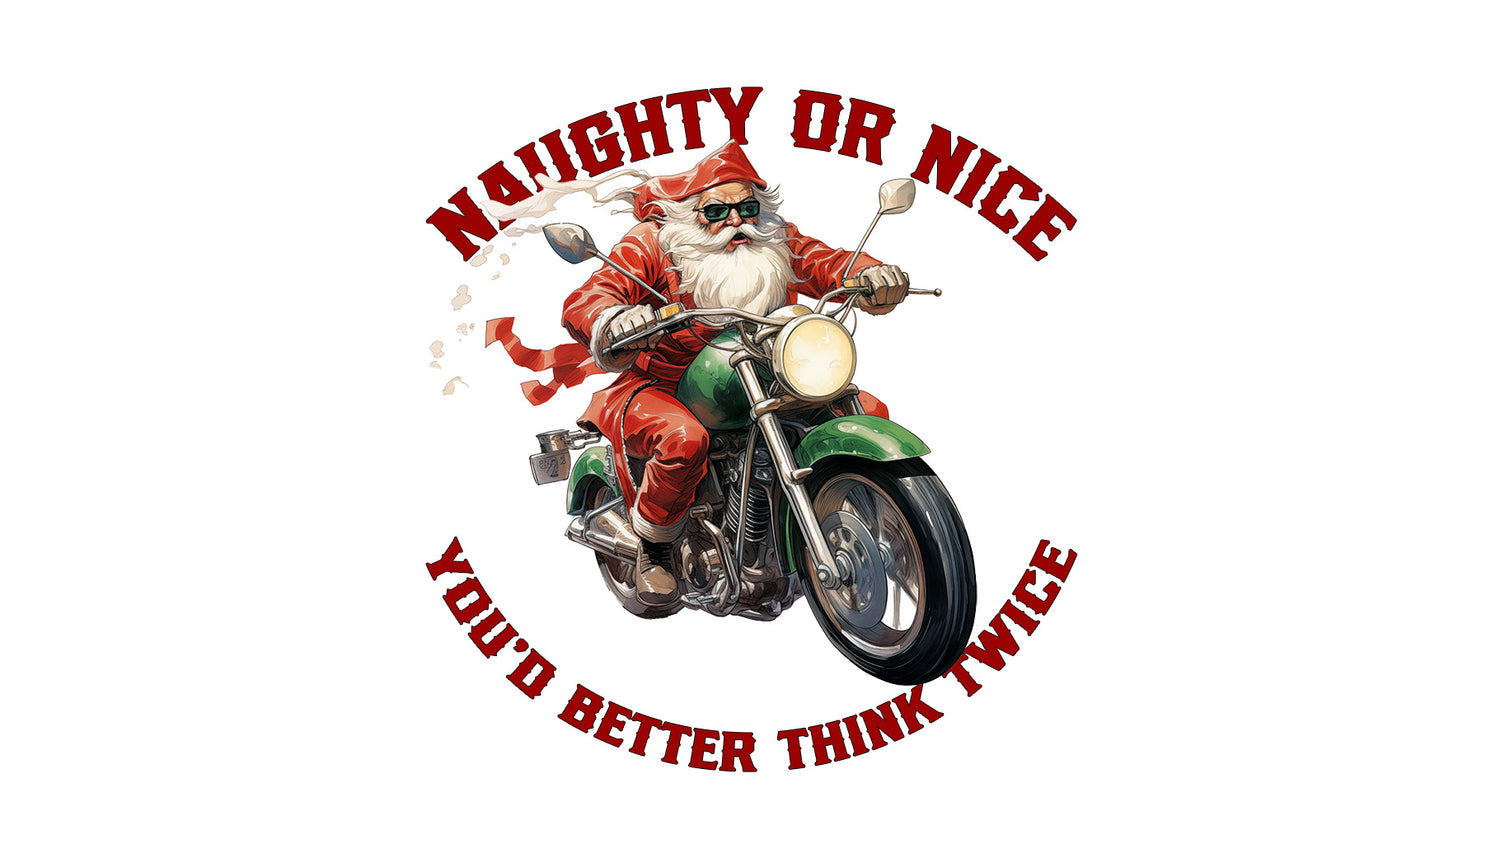 Naughty or nice, you'd better think twice!